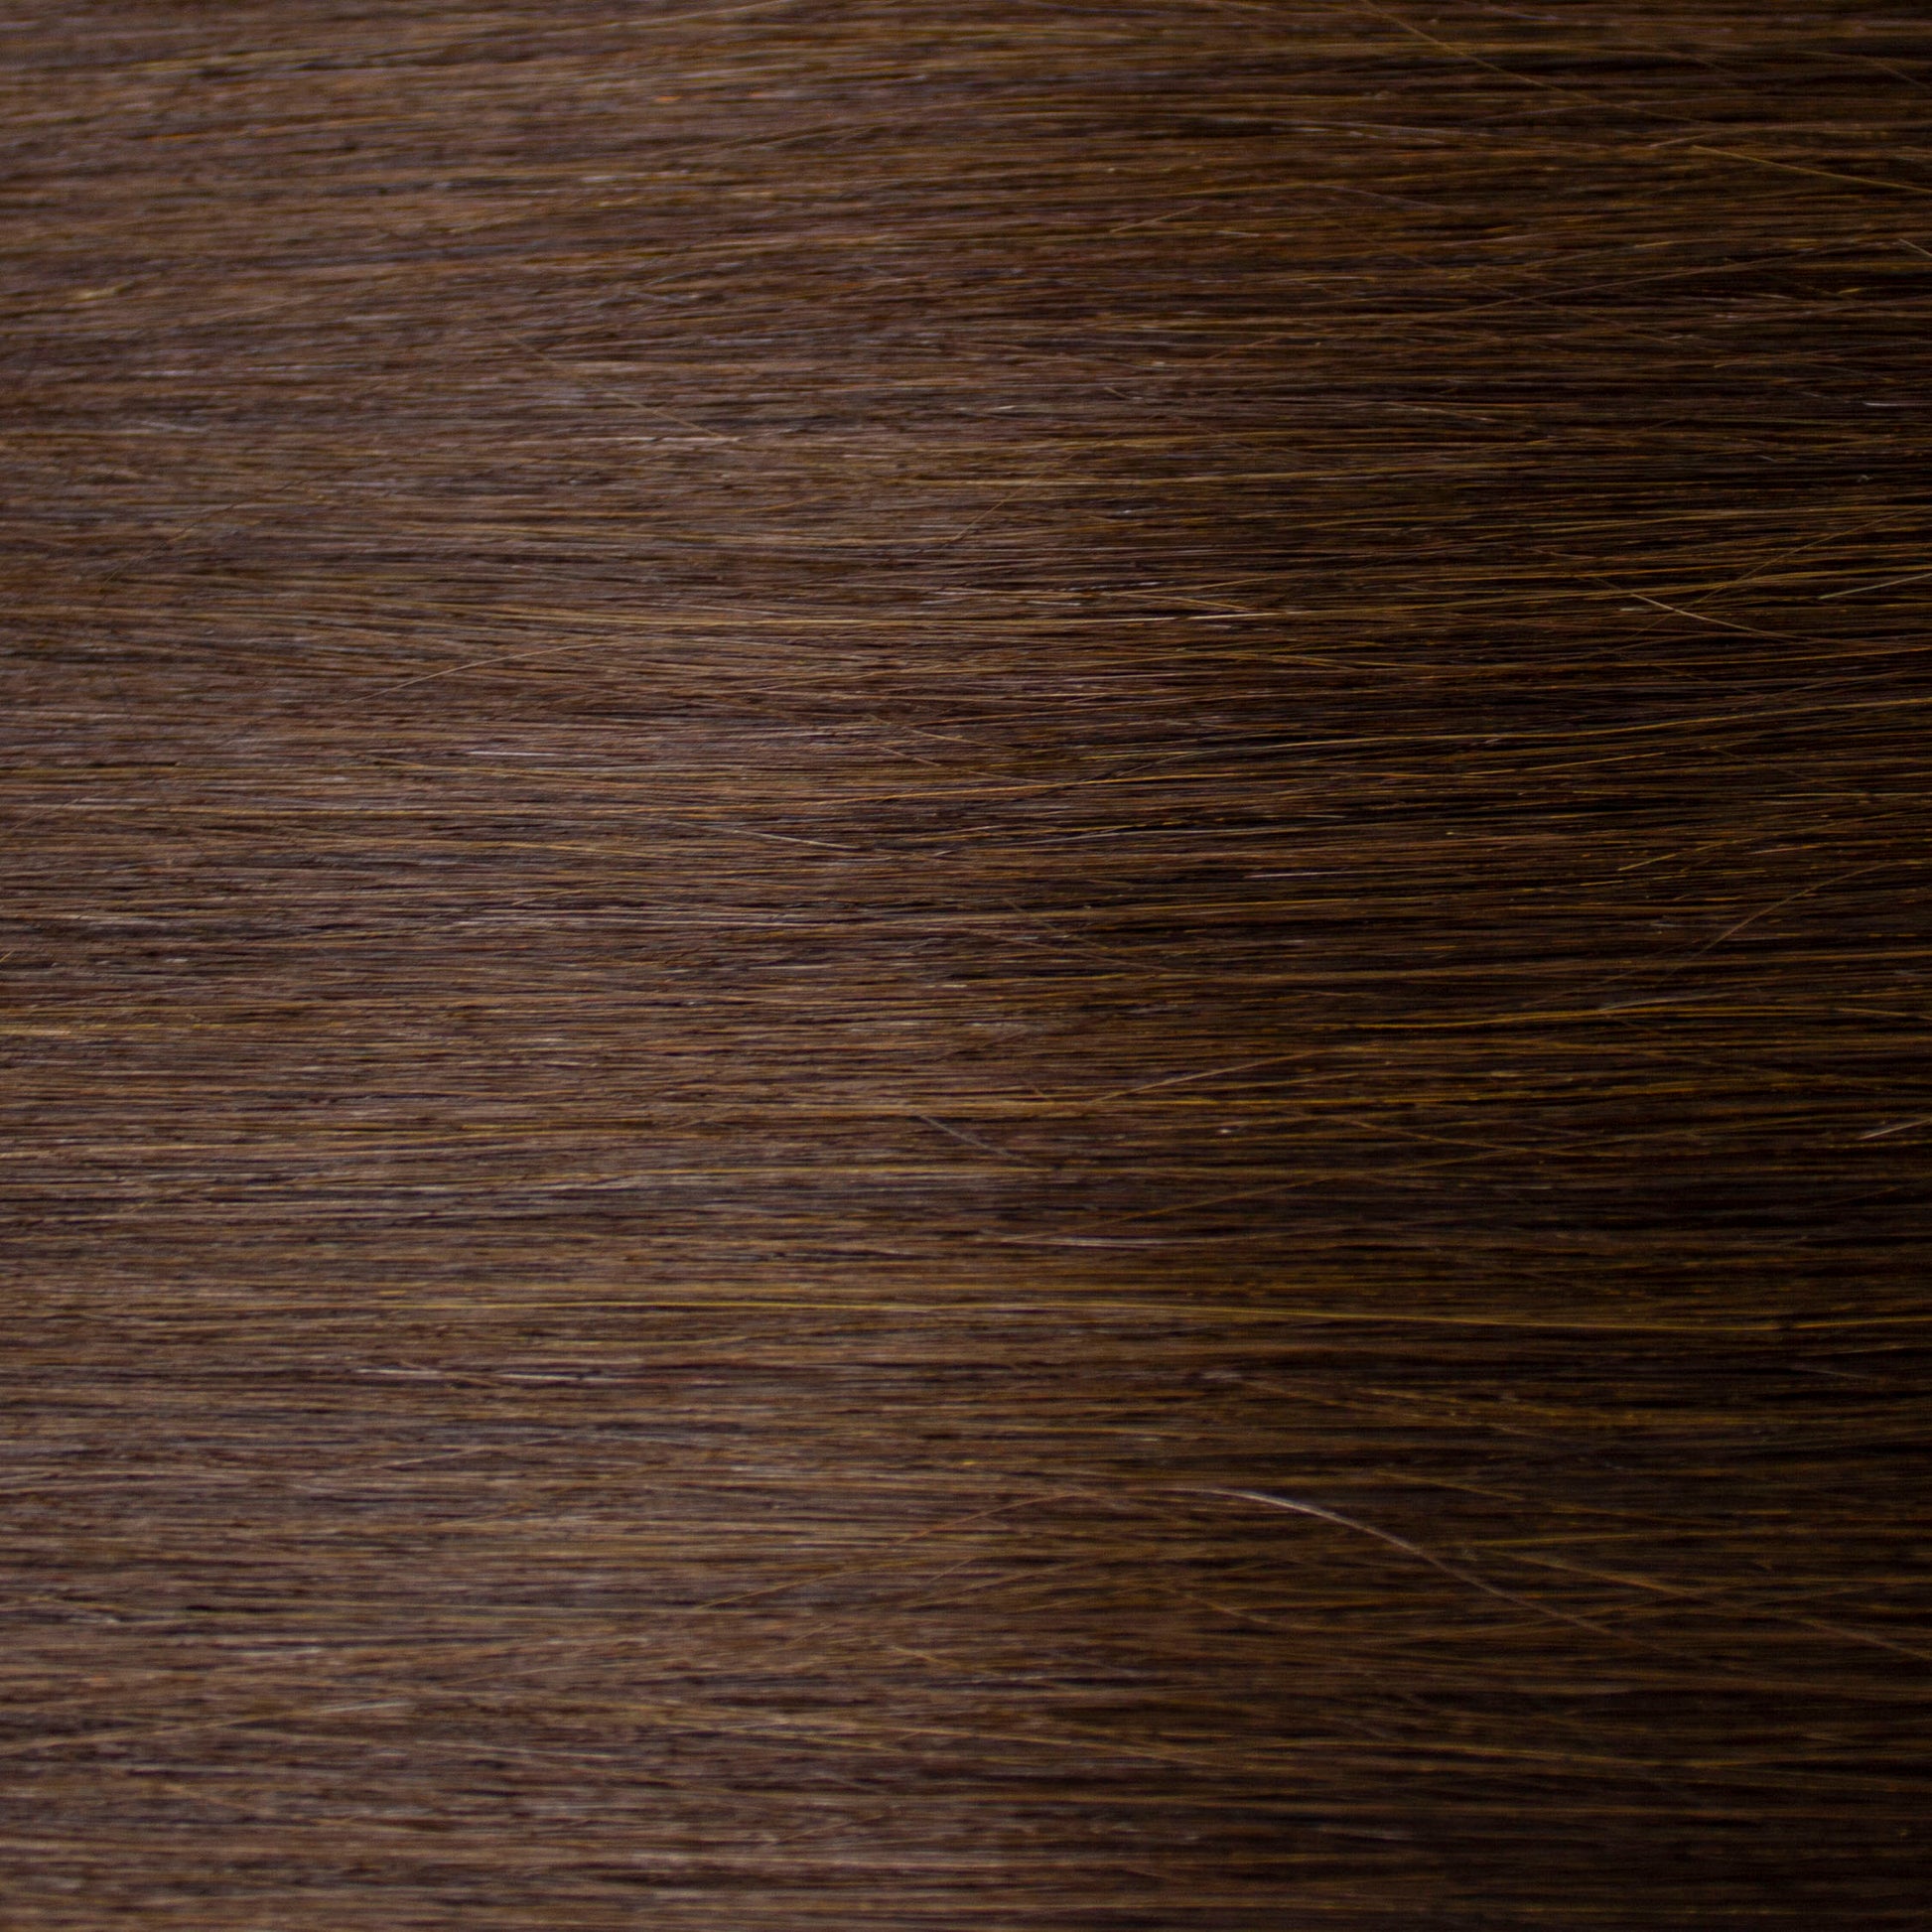 Chloe Collection - Thin weft 14" #2 - 60g.